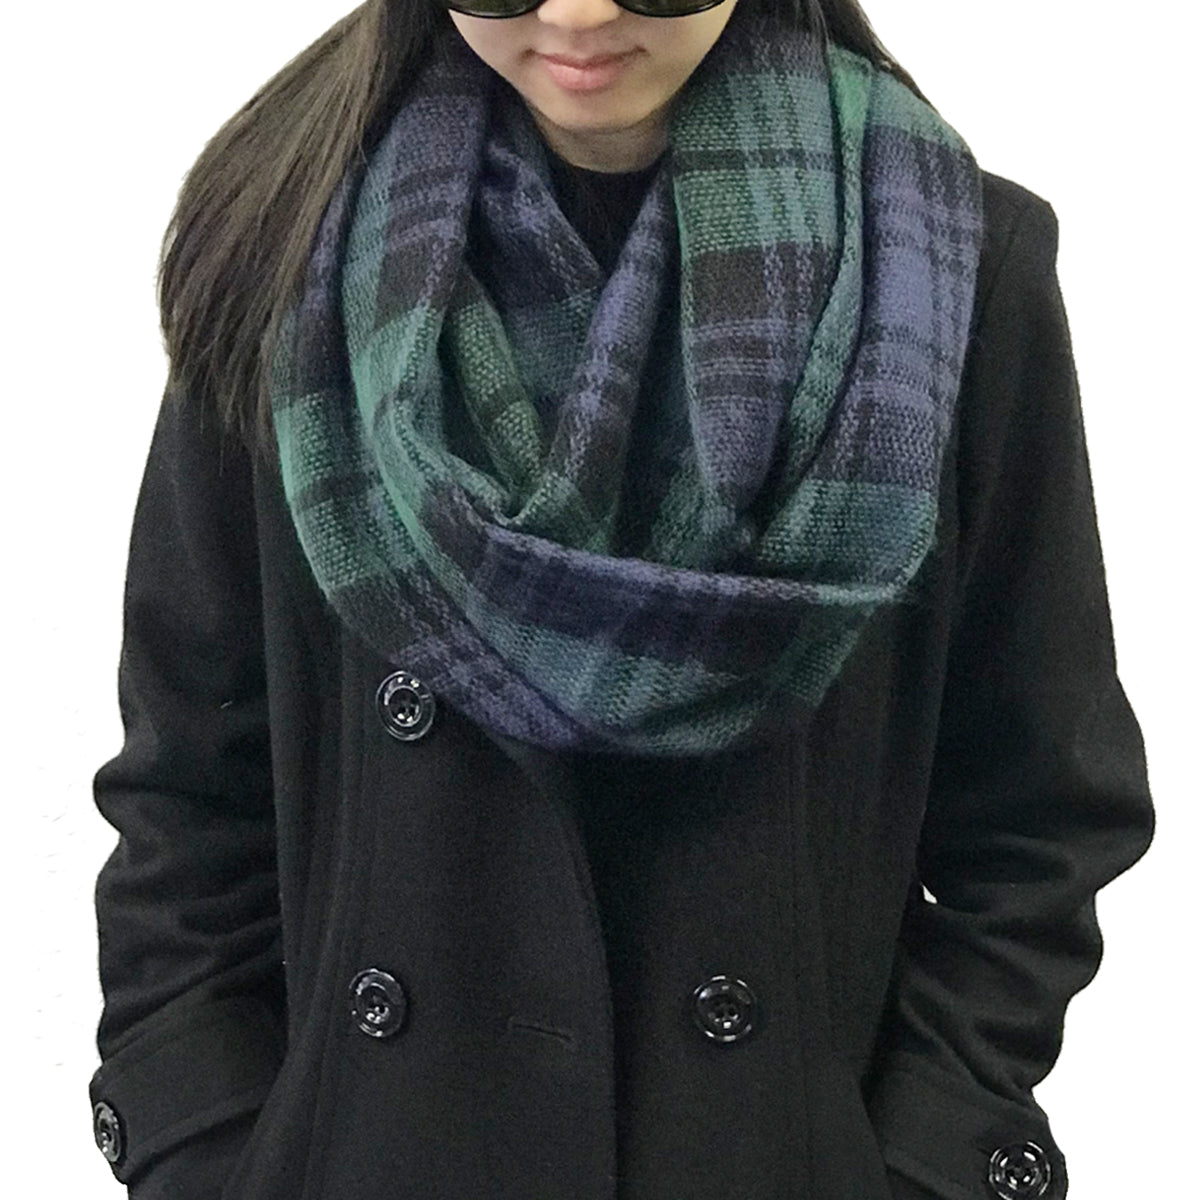 Wrapables Plaid Print Winter Infinity Scarf and Beanie Hat Set